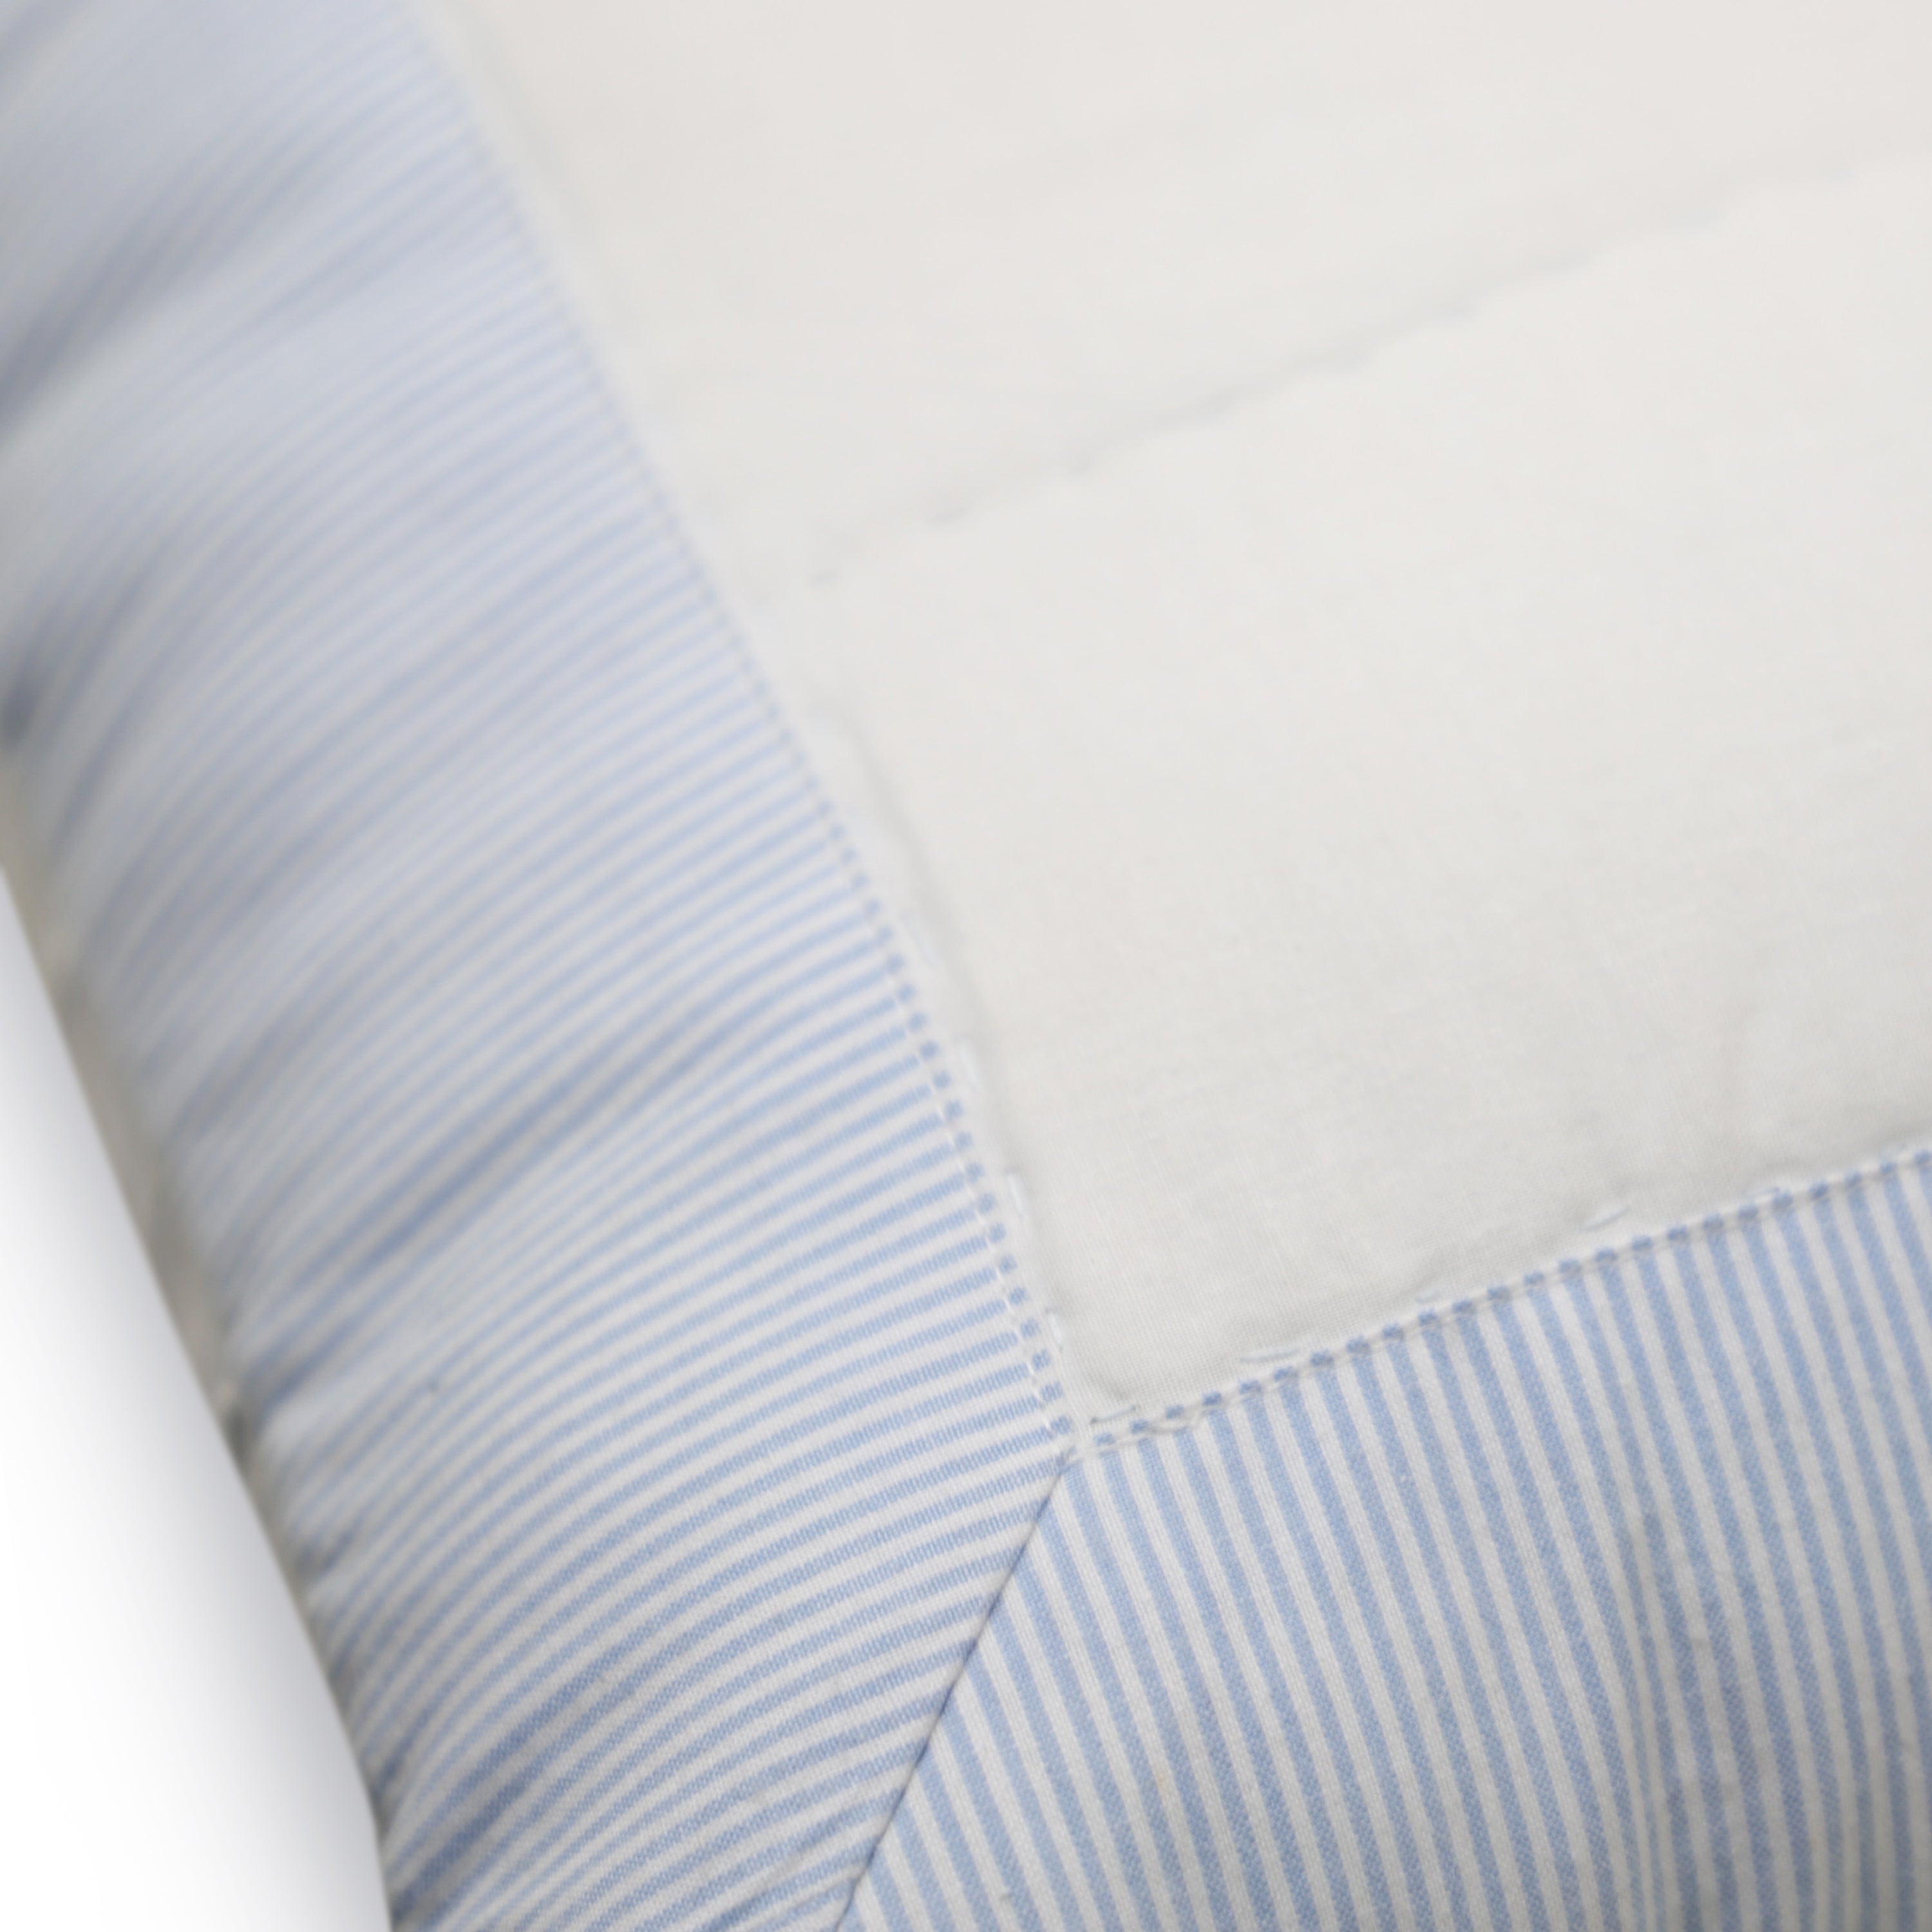 The quilted shams reverse to solid white fabric with envelop tie closure for a neat look.